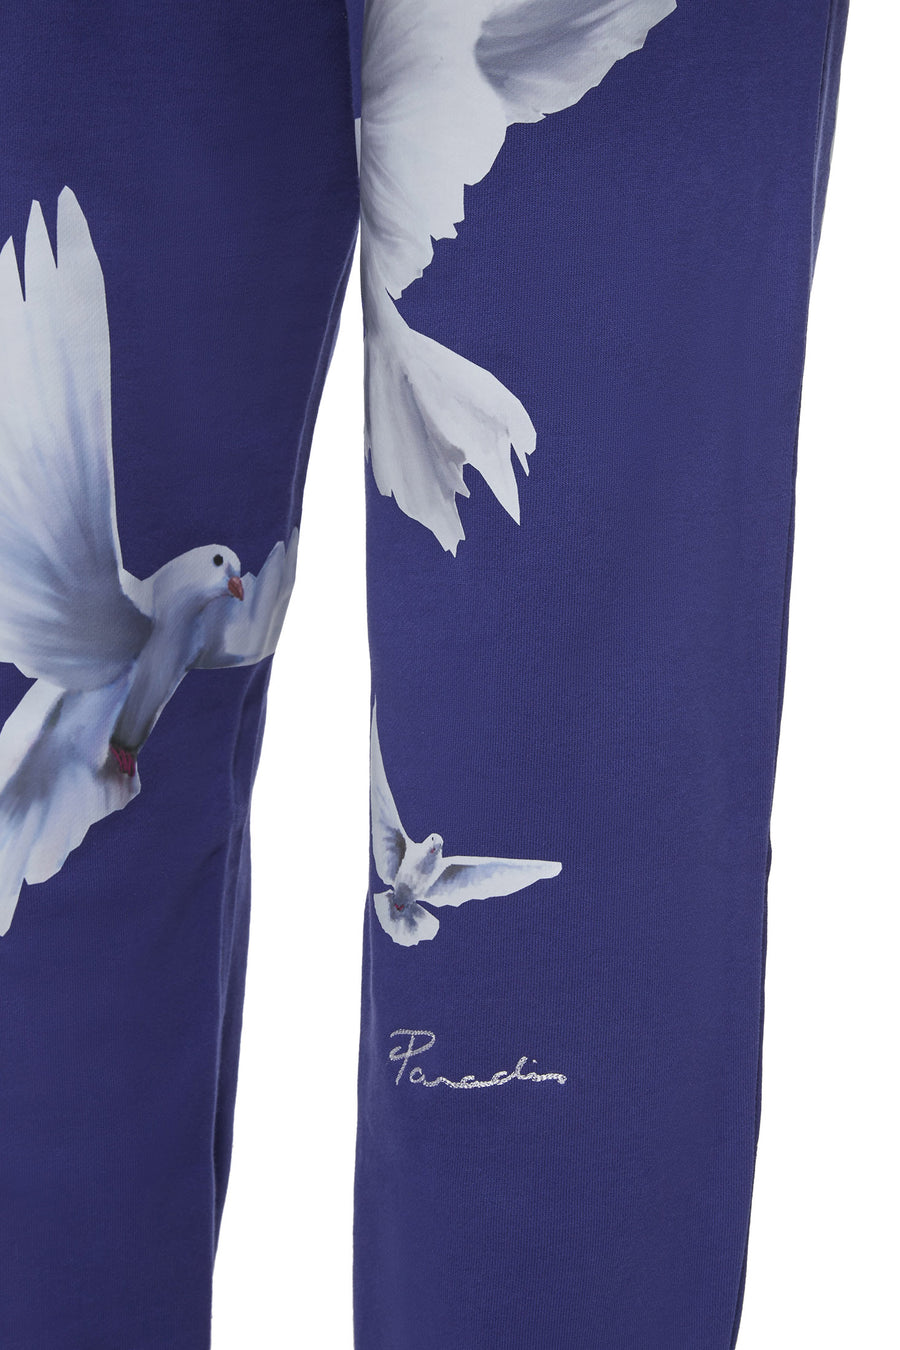 FREEDOM DOVES PERSIAN BLUE LOUNGE PANTS